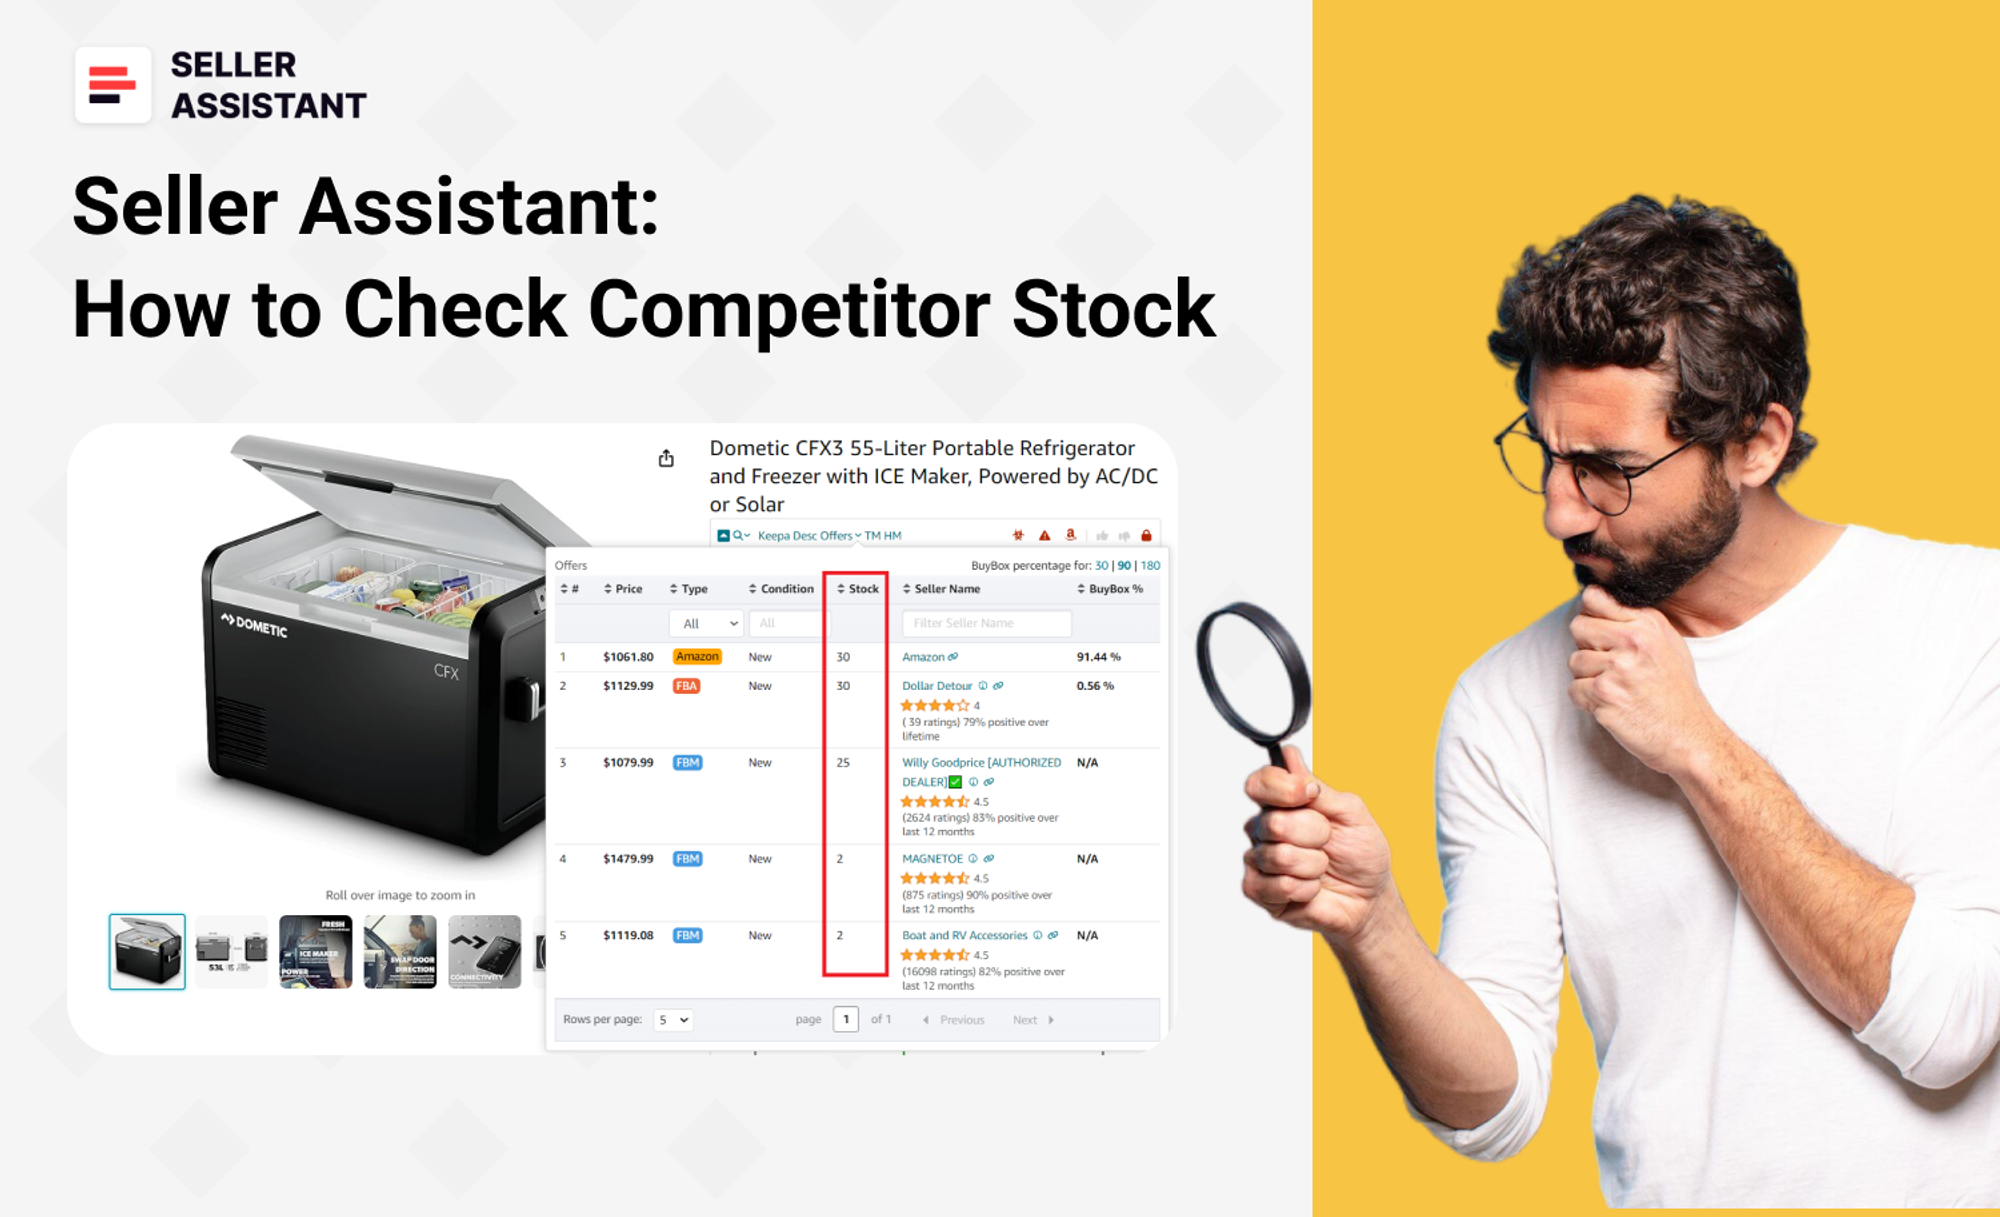 How to Check Competitor Stock on Amazon